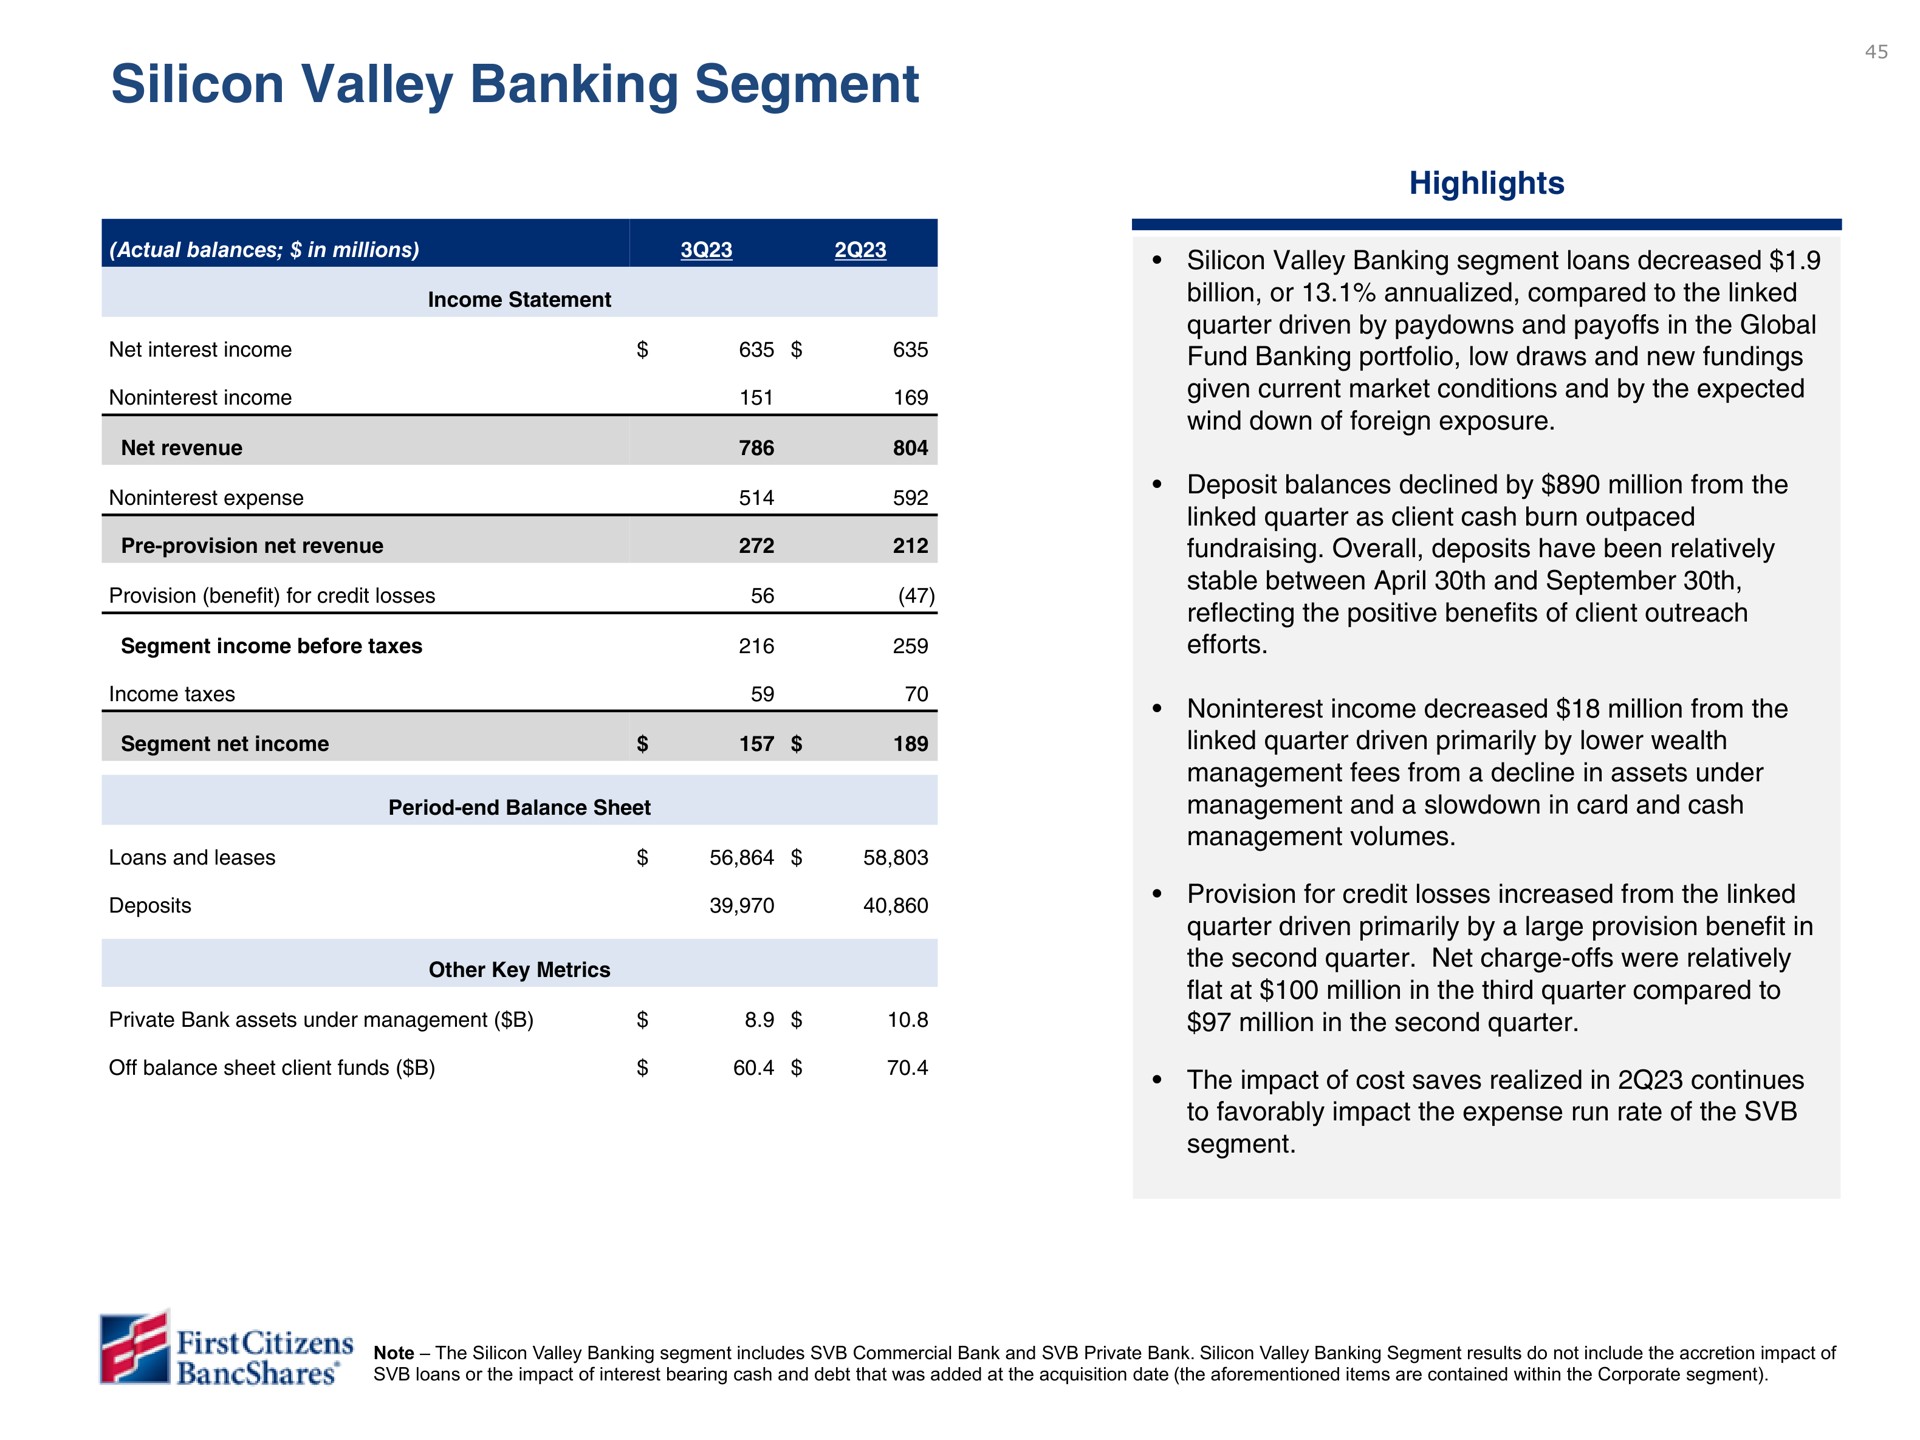 silicon valley banking segment | First Citizens BancShares